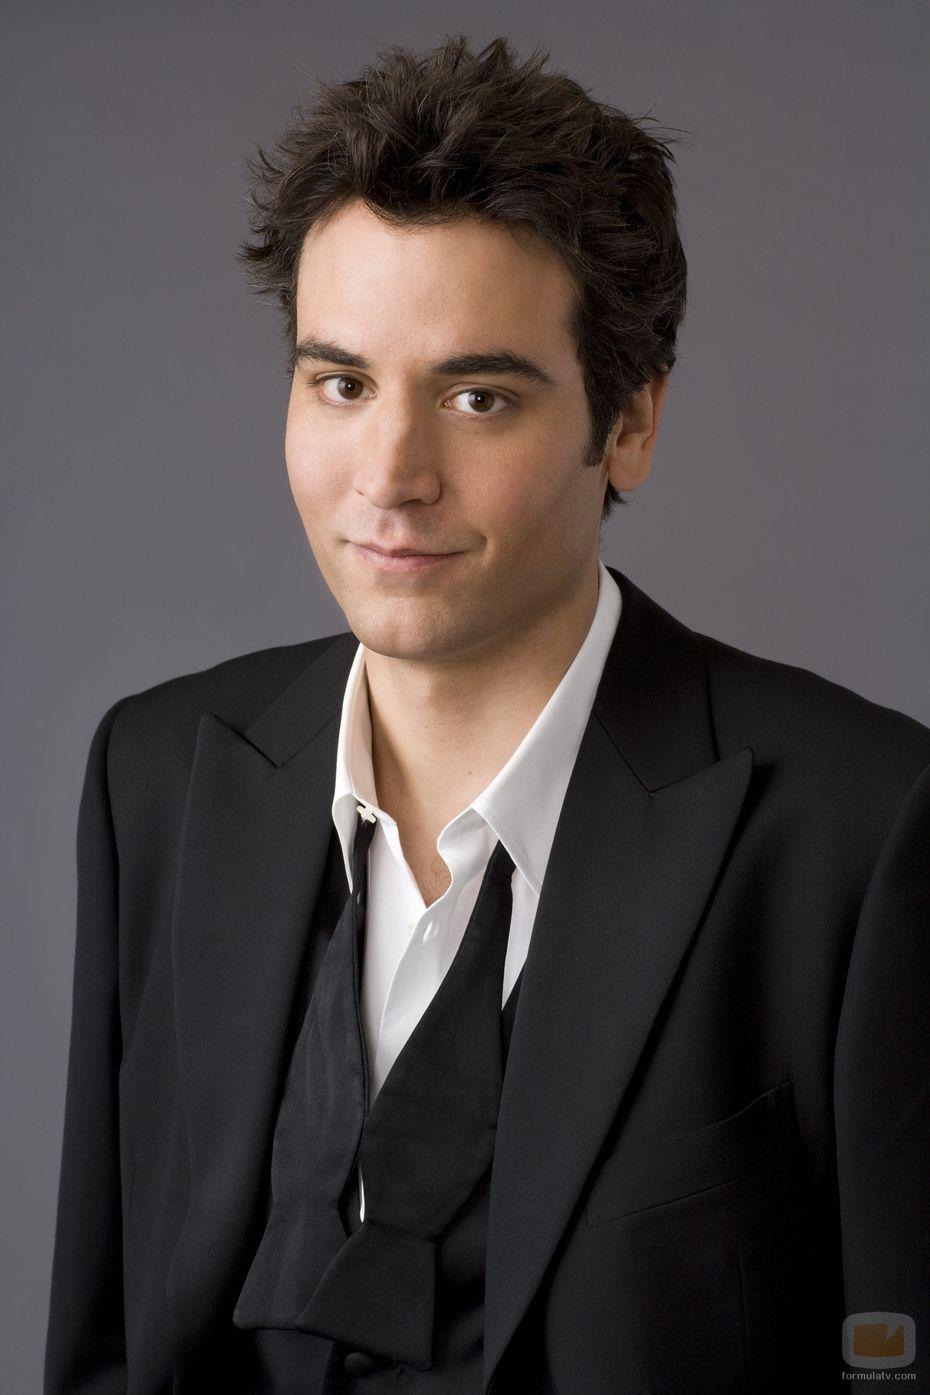 Star Josh Radnor cried over How I Met Your Mother finale